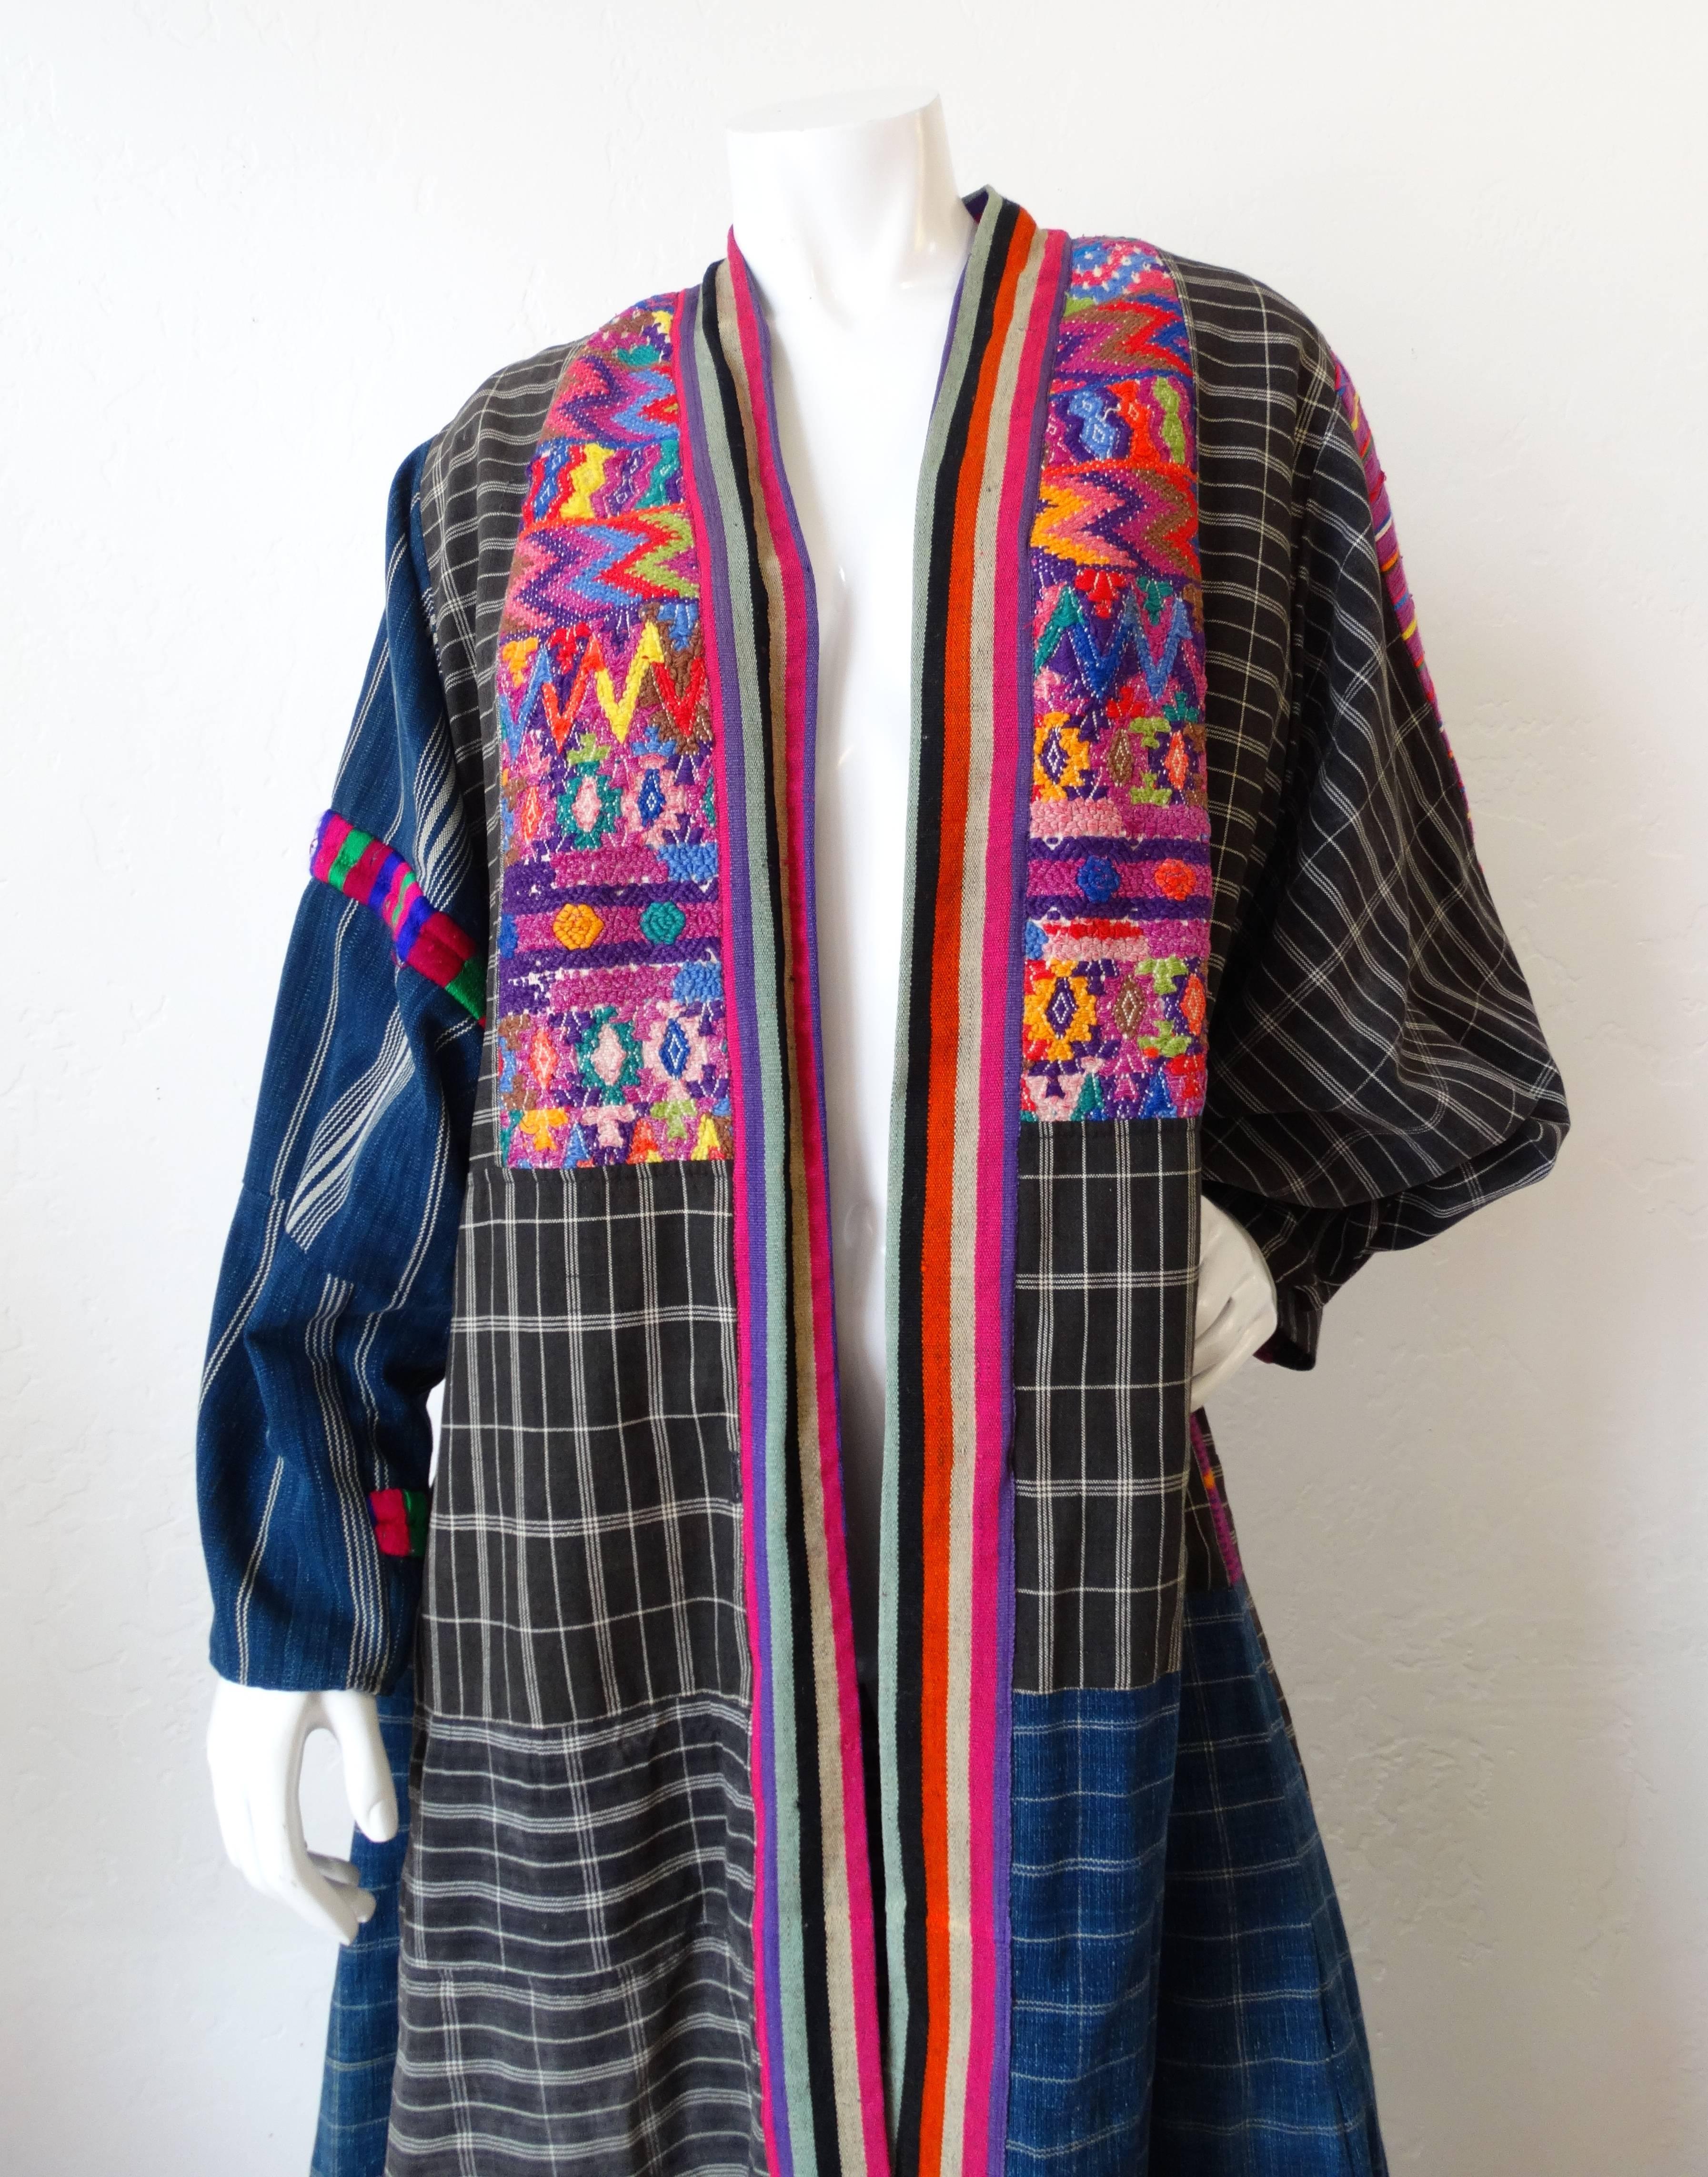 Amazing 1970s embroidered duster jacket made of Guatemalan fabric! Contrasting grey and blue, striped and plaid prints. Accented with panels of multicolored embroidery around the neckline. Oversized sleeves and long duster length. Has a vest with